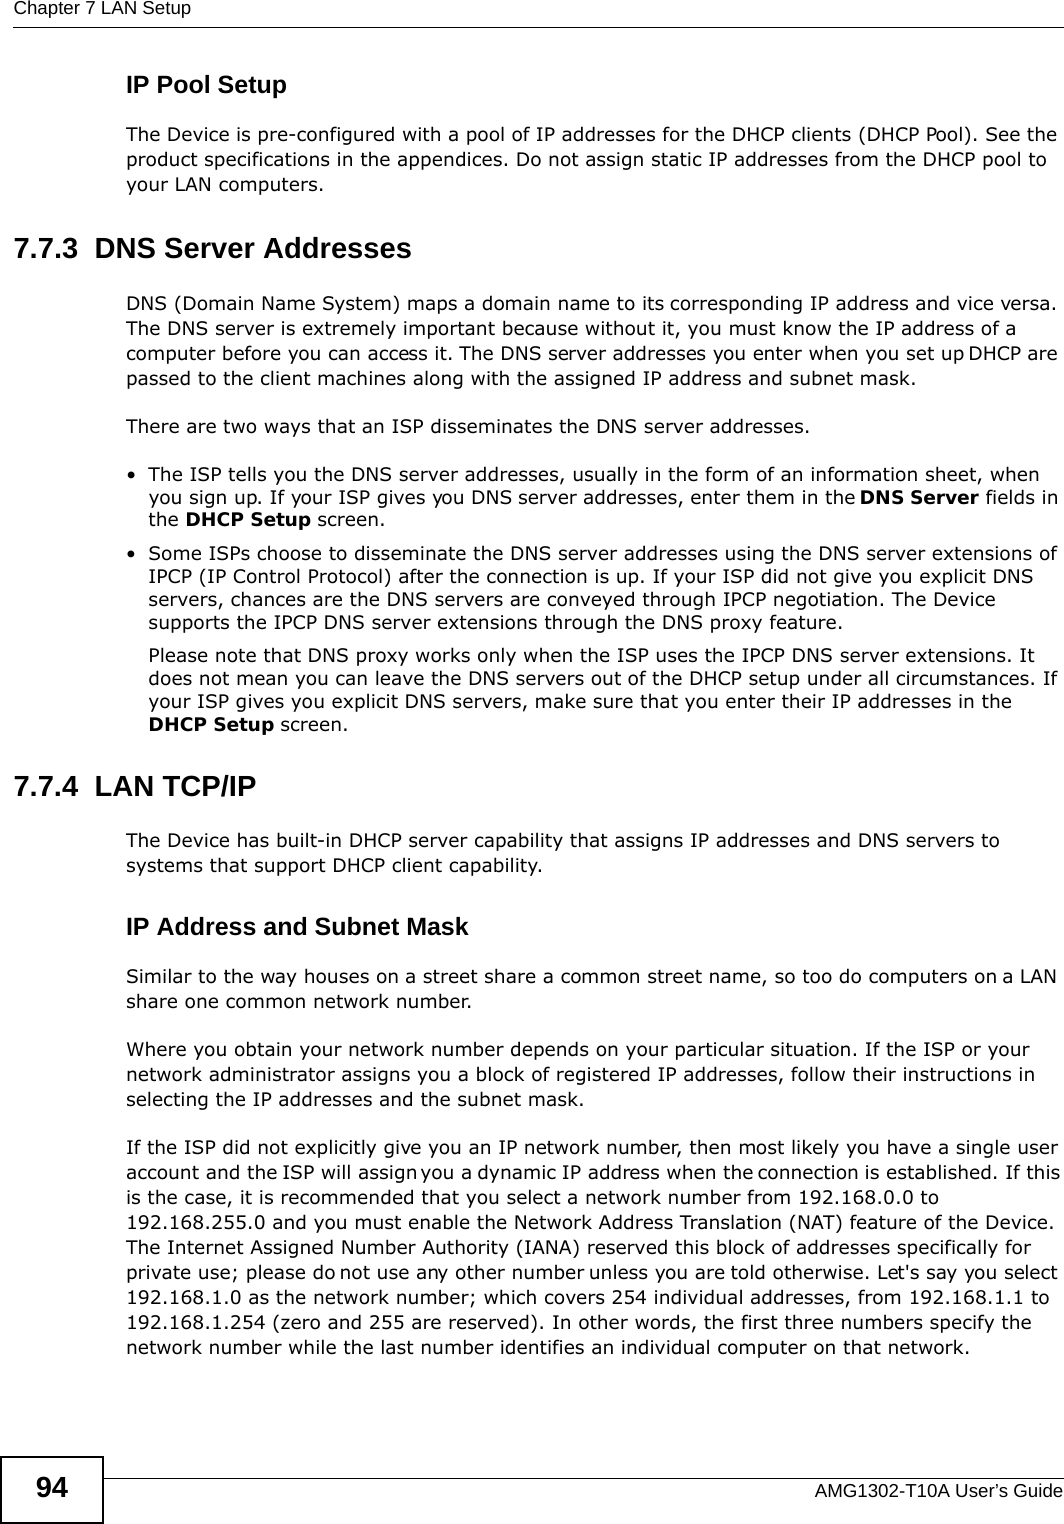 Chapter 7 LAN SetupAMG1302-T10A User’s Guide94IP Pool SetupThe Device is pre-configured with a pool of IP addresses for the DHCP clients (DHCP Pool). See the product specifications in the appendices. Do not assign static IP addresses from the DHCP pool to your LAN computers.7.7.3  DNS Server Addresses DNS (Domain Name System) maps a domain name to its corresponding IP address and vice versa. The DNS server is extremely important because without it, you must know the IP address of a computer before you can access it. The DNS server addresses you enter when you set up DHCP are passed to the client machines along with the assigned IP address and subnet mask.There are two ways that an ISP disseminates the DNS server addresses. • The ISP tells you the DNS server addresses, usually in the form of an information sheet, when you sign up. If your ISP gives you DNS server addresses, enter them in the DNS Server fields in the DHCP Setup screen.• Some ISPs choose to disseminate the DNS server addresses using the DNS server extensions of IPCP (IP Control Protocol) after the connection is up. If your ISP did not give you explicit DNS servers, chances are the DNS servers are conveyed through IPCP negotiation. The Device supports the IPCP DNS server extensions through the DNS proxy feature.Please note that DNS proxy works only when the ISP uses the IPCP DNS server extensions. It does not mean you can leave the DNS servers out of the DHCP setup under all circumstances. If your ISP gives you explicit DNS servers, make sure that you enter their IP addresses in the DHCP Setup screen.7.7.4  LAN TCP/IP The Device has built-in DHCP server capability that assigns IP addresses and DNS servers to systems that support DHCP client capability.IP Address and Subnet MaskSimilar to the way houses on a street share a common street name, so too do computers on a LAN share one common network number.Where you obtain your network number depends on your particular situation. If the ISP or your network administrator assigns you a block of registered IP addresses, follow their instructions in selecting the IP addresses and the subnet mask.If the ISP did not explicitly give you an IP network number, then most likely you have a single user account and the ISP will assign you a dynamic IP address when the connection is established. If this is the case, it is recommended that you select a network number from 192.168.0.0 to 192.168.255.0 and you must enable the Network Address Translation (NAT) feature of the Device. The Internet Assigned Number Authority (IANA) reserved this block of addresses specifically for private use; please do not use any other number unless you are told otherwise. Let&apos;s say you select 192.168.1.0 as the network number; which covers 254 individual addresses, from 192.168.1.1 to 192.168.1.254 (zero and 255 are reserved). In other words, the first three numbers specify the network number while the last number identifies an individual computer on that network.